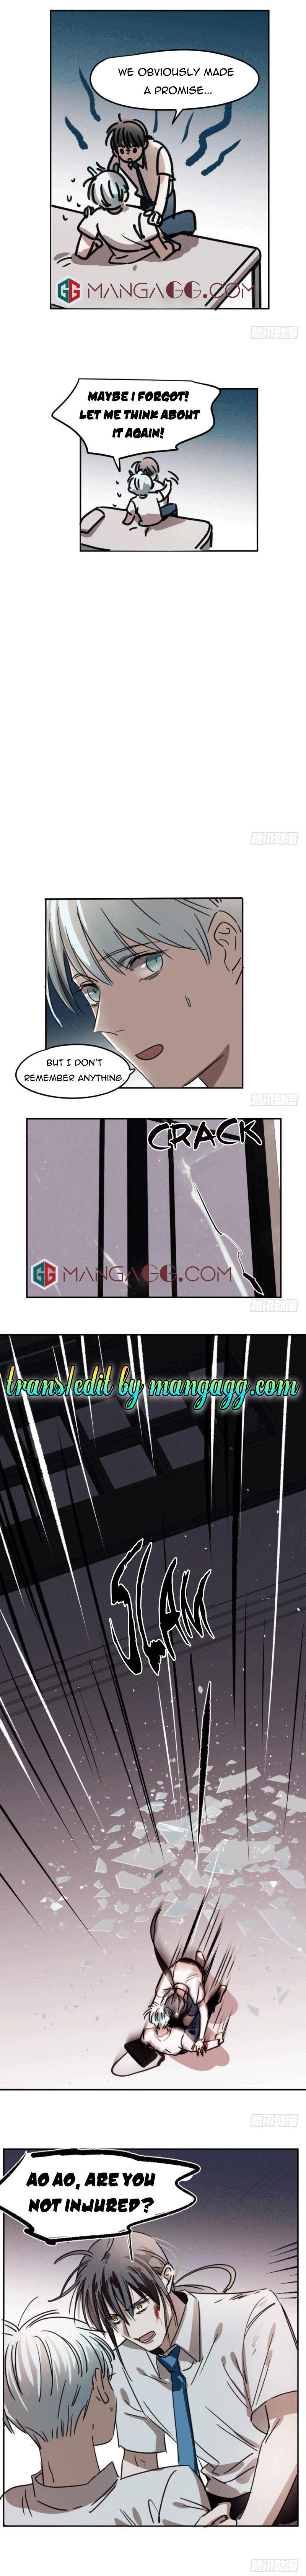 Chasing Ao Ao Chapter 5 - Page 5